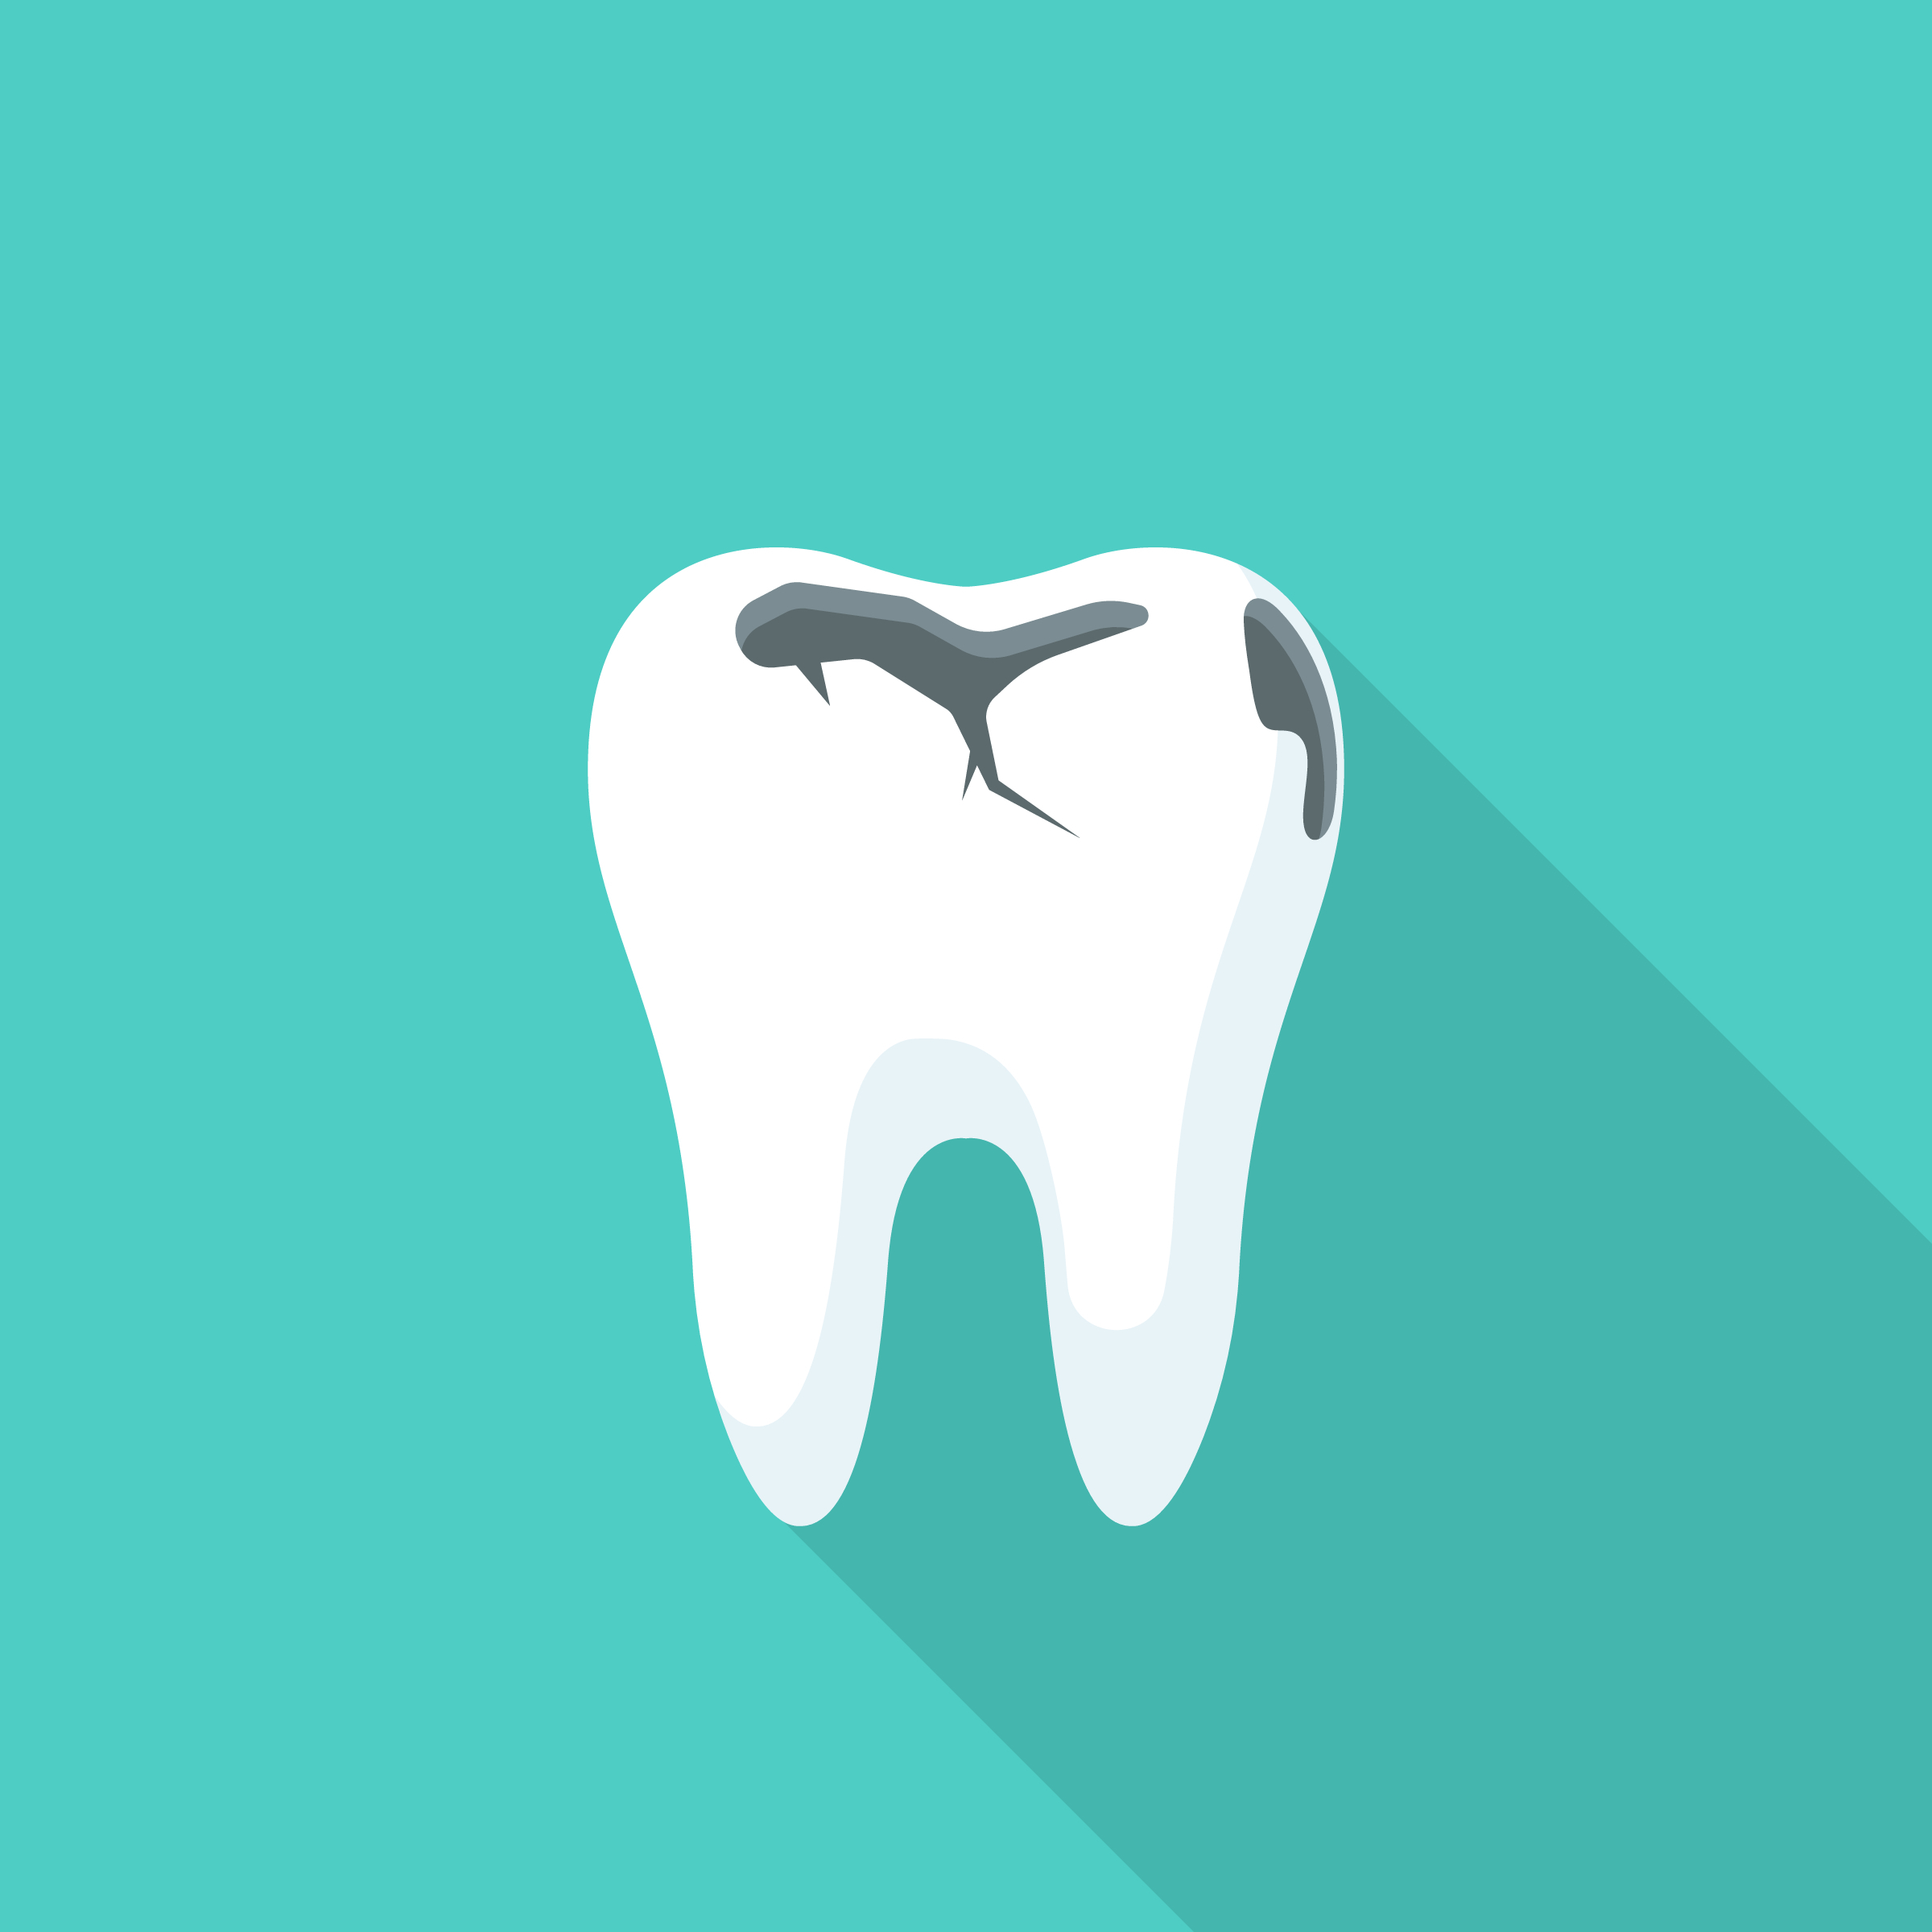 Tooth decay. Bad tooth. Dental care background. Unhealthy teeth. Vector illustration flat design. Isolated on background. Stomatology care for teeth.